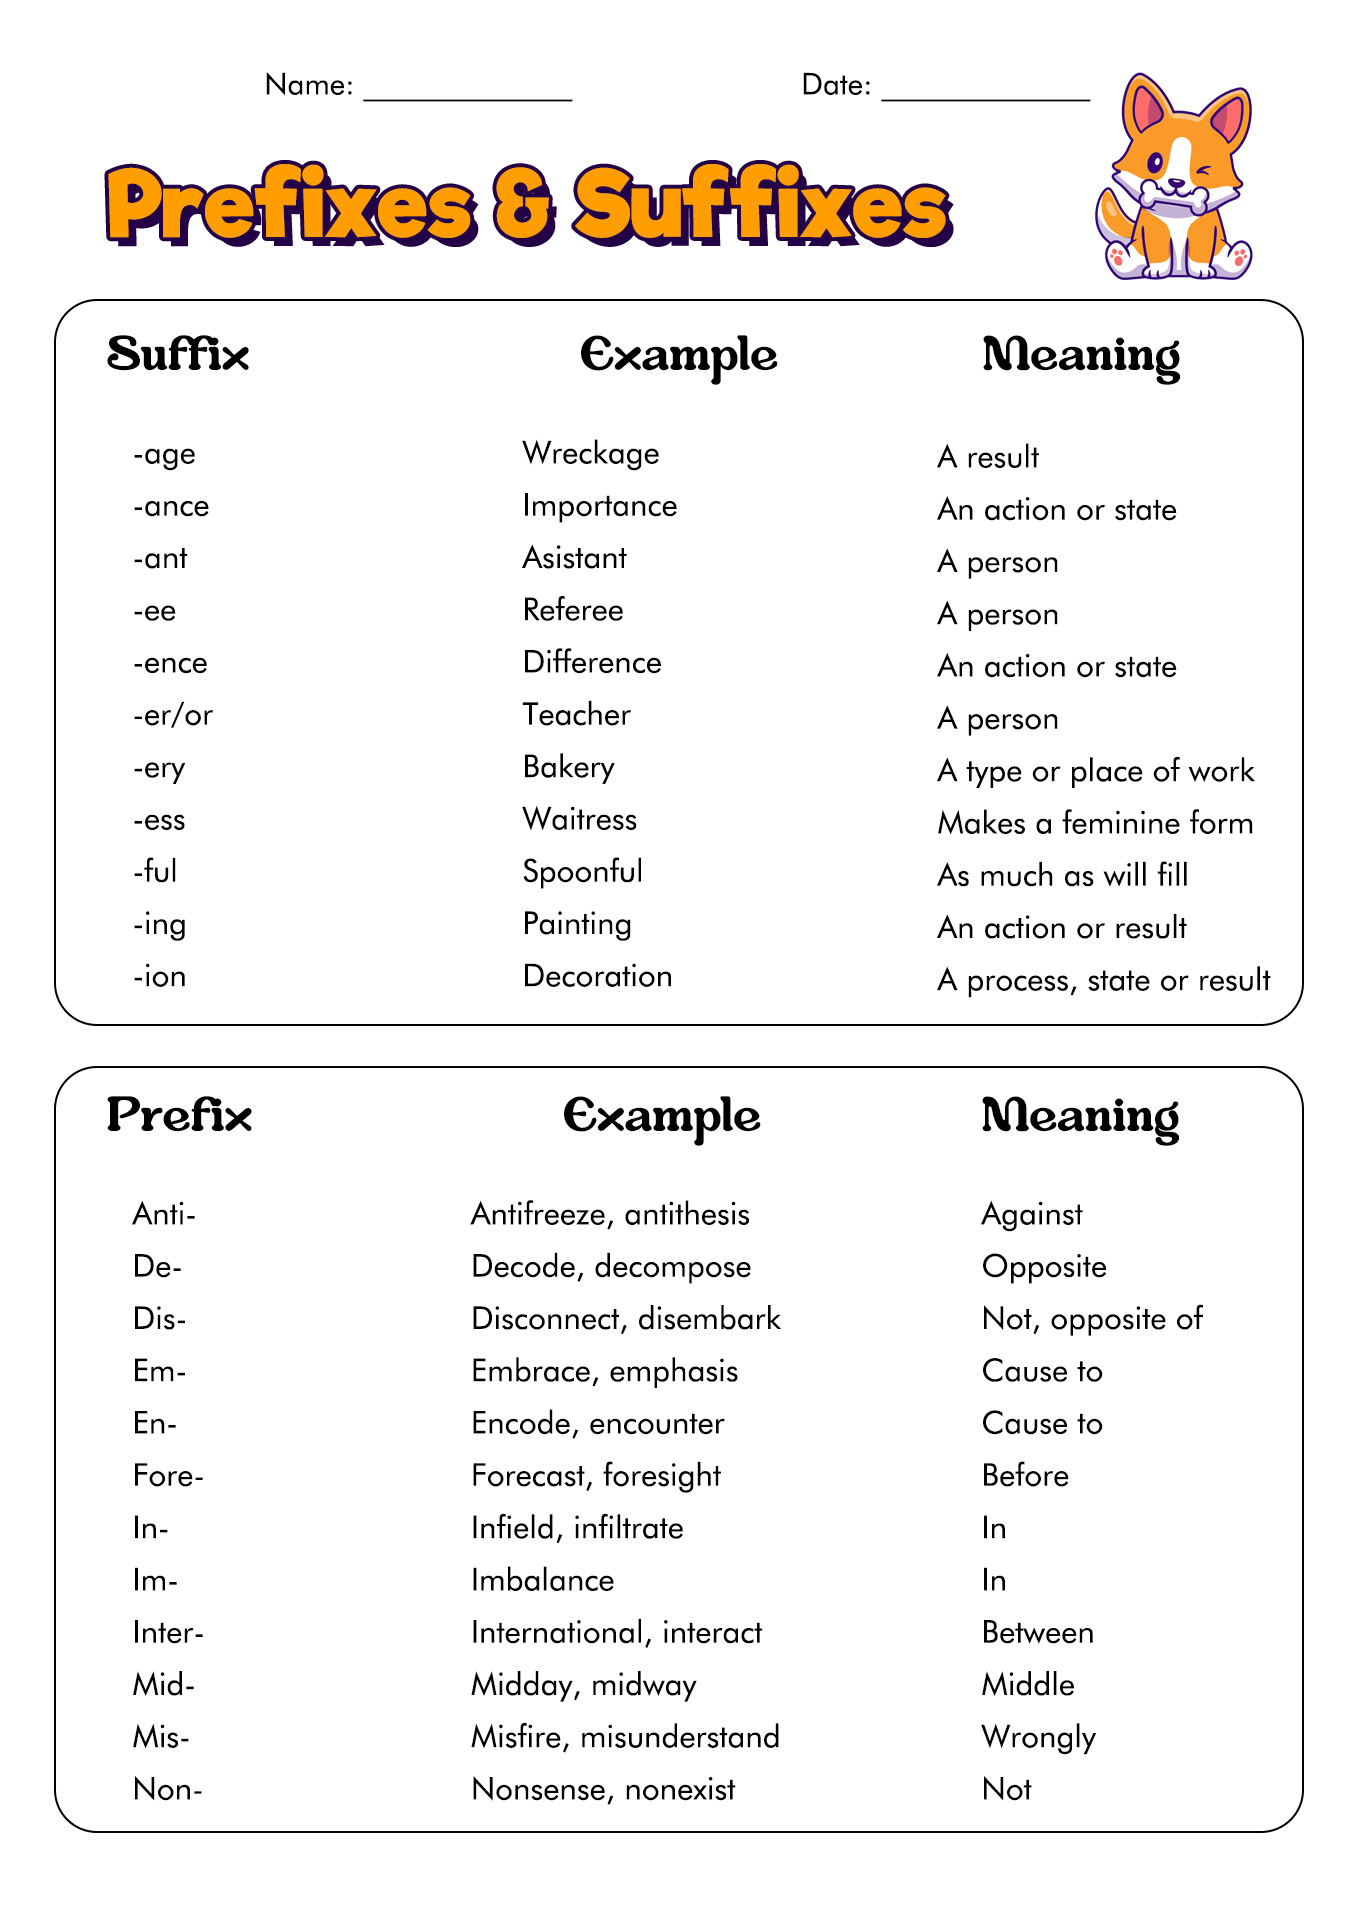 17 Best Images Of Medical Prefixes And Suffixes Worksheets Root Words